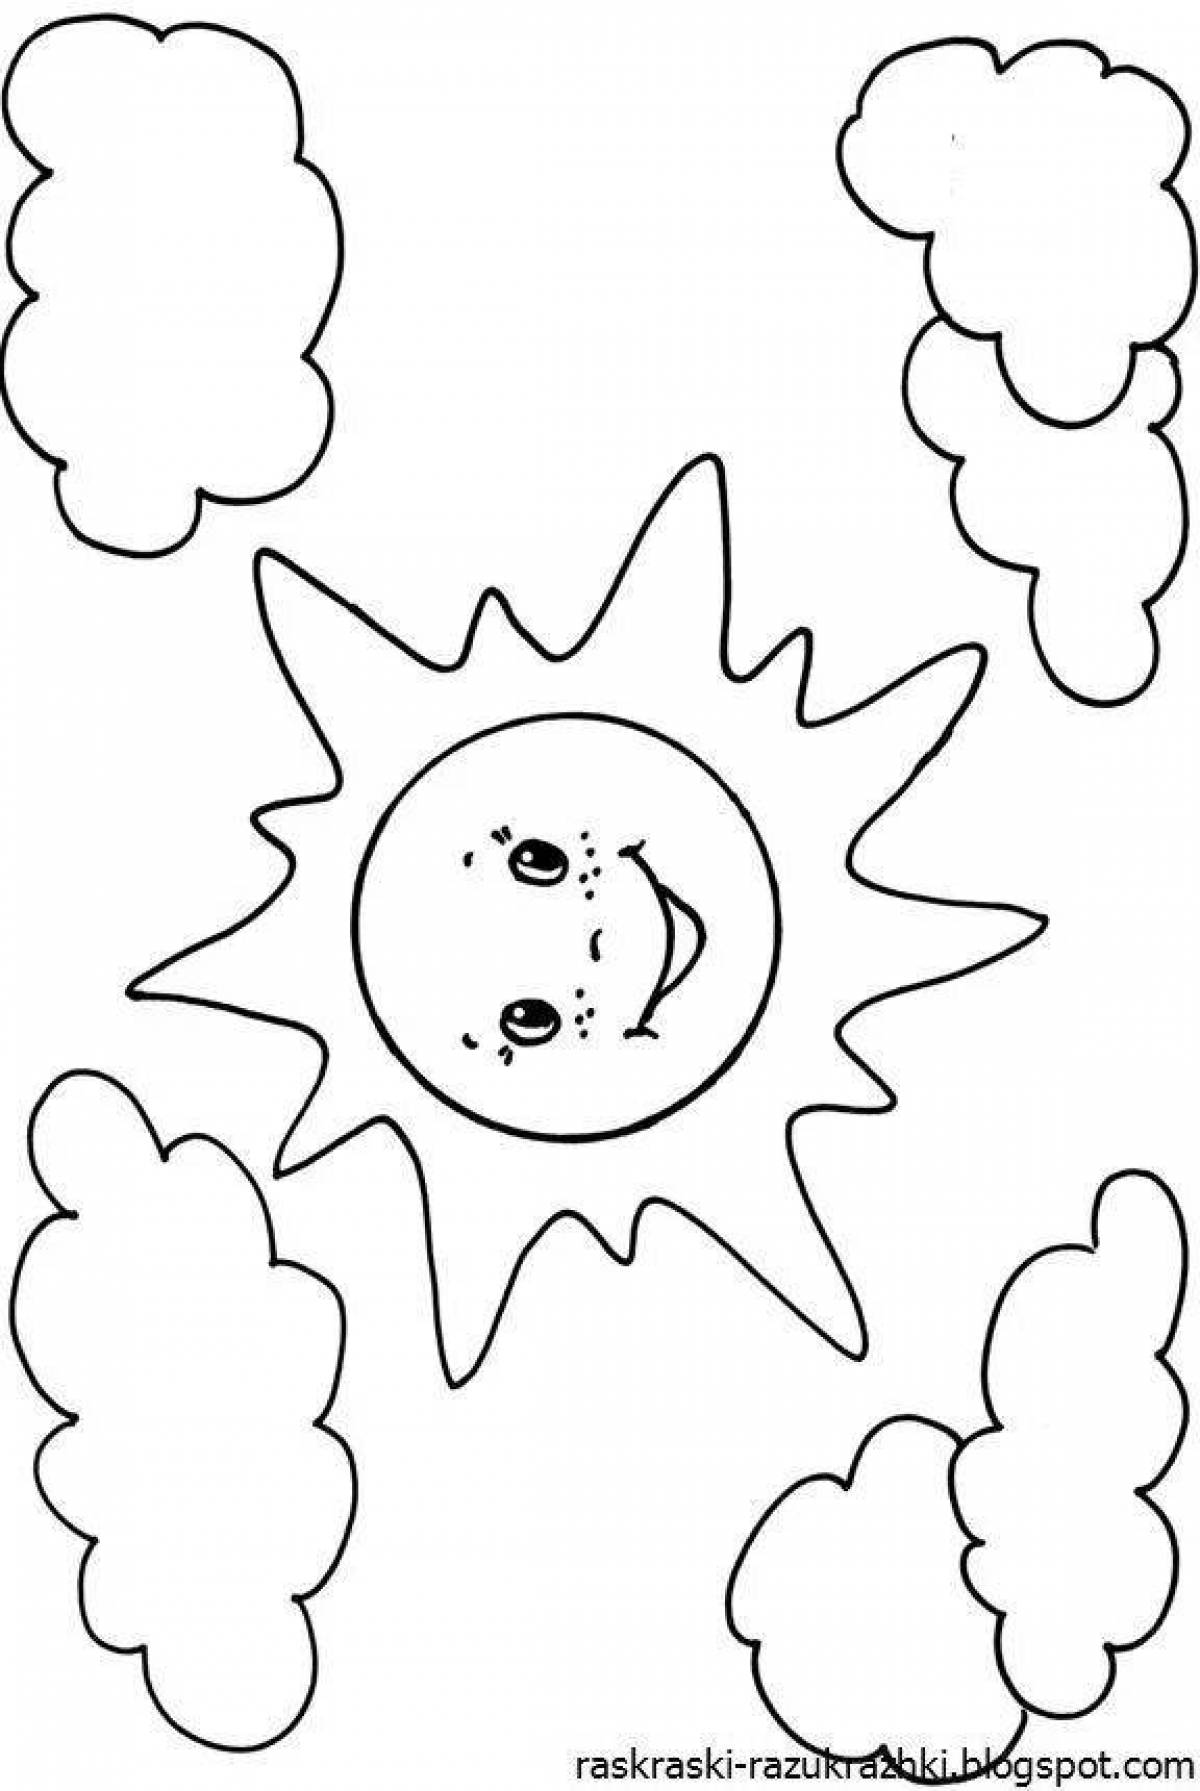 Glitter sun coloring book for kids 3-4 years old